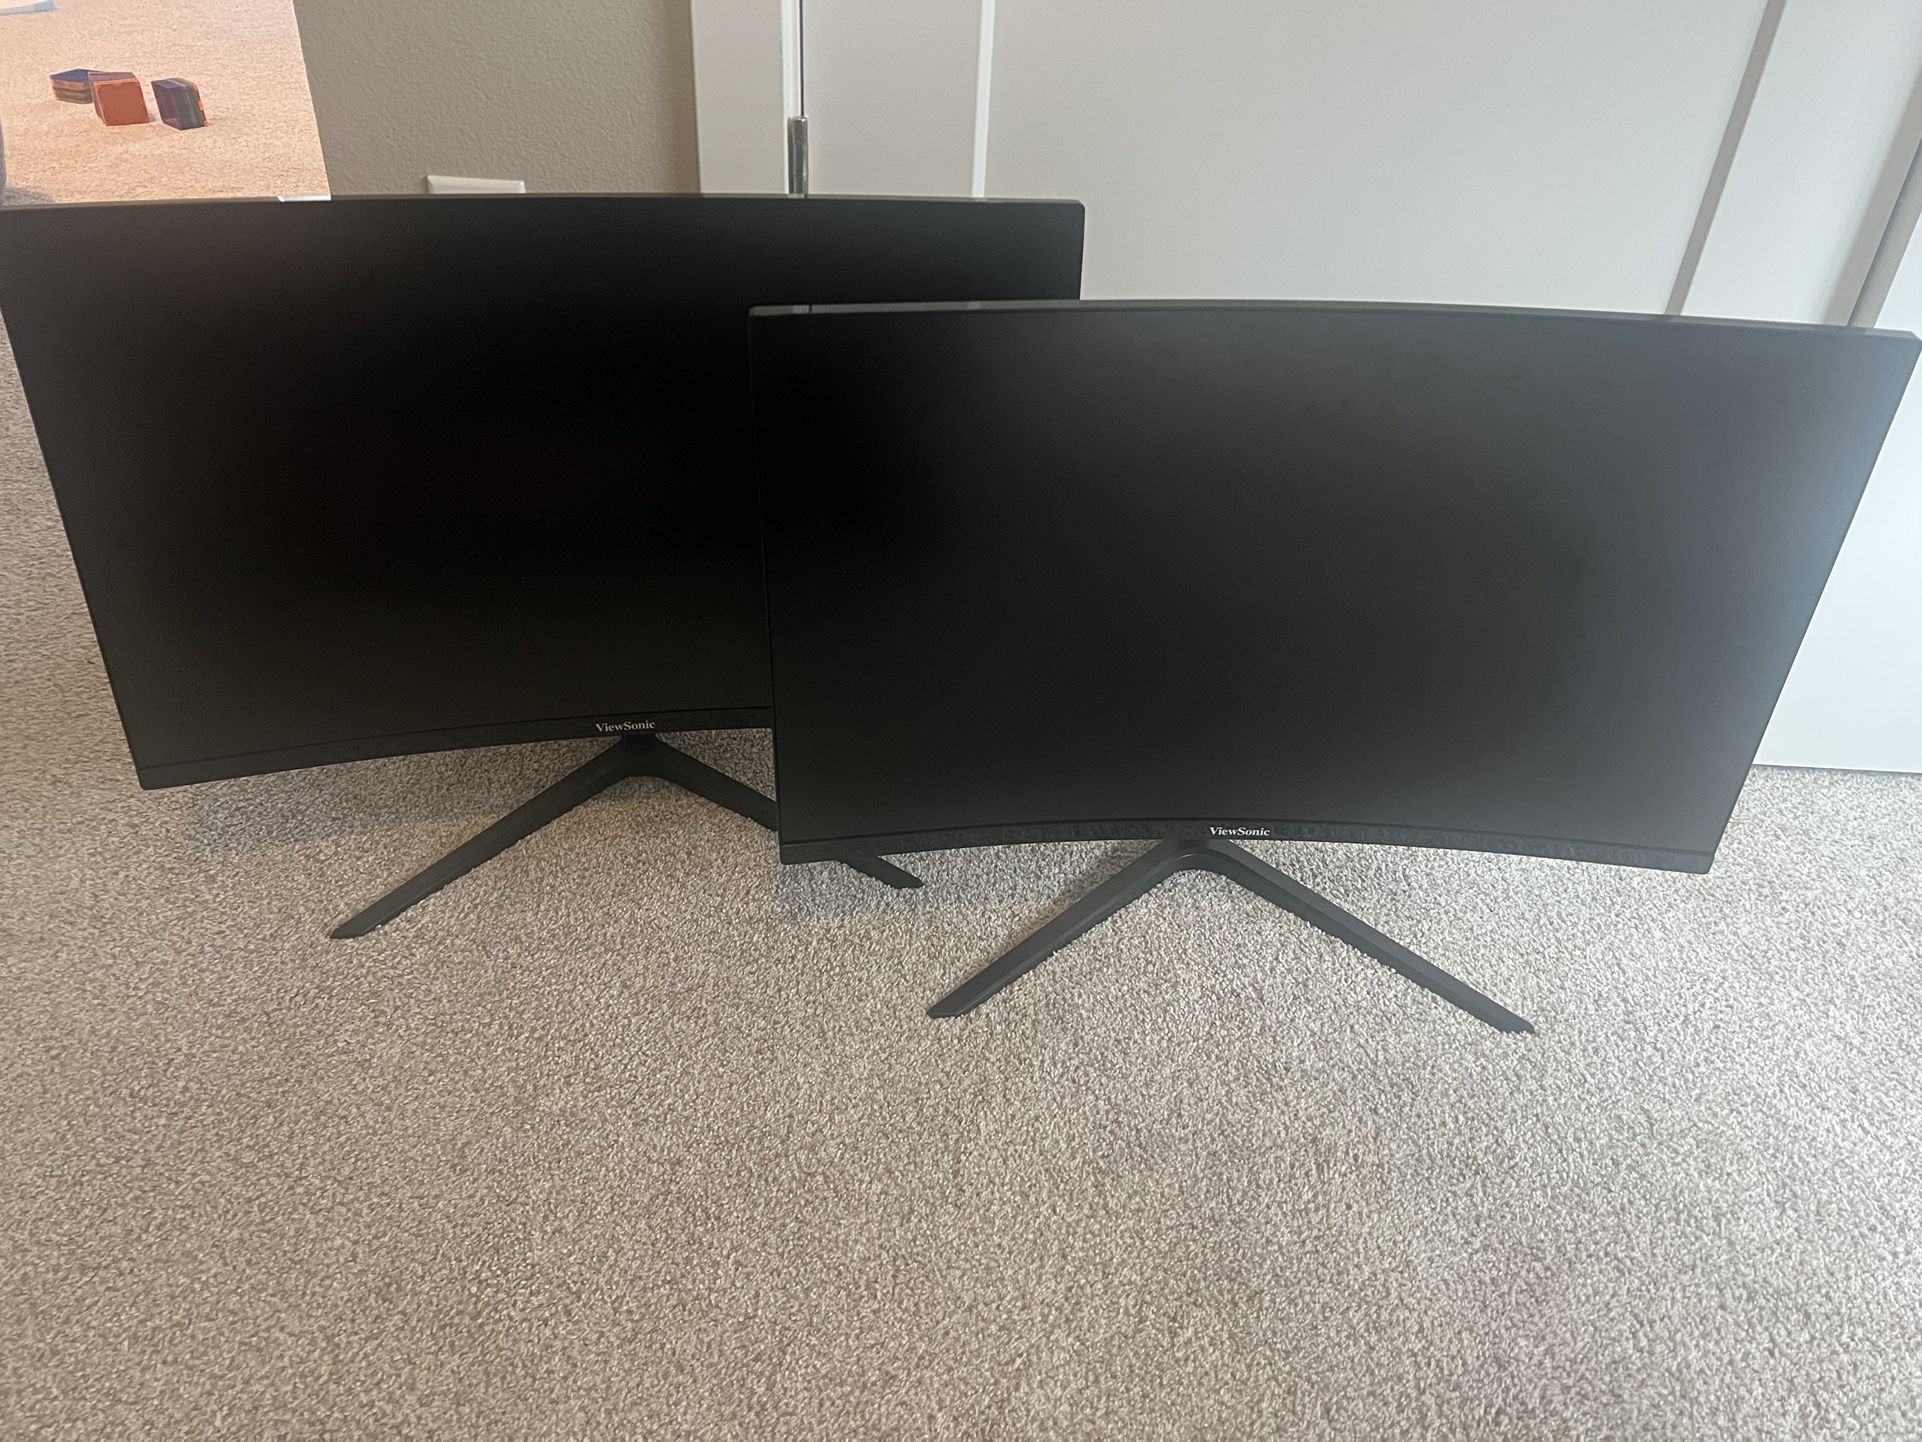 Computer Monitors (1 or 2 For Sale)